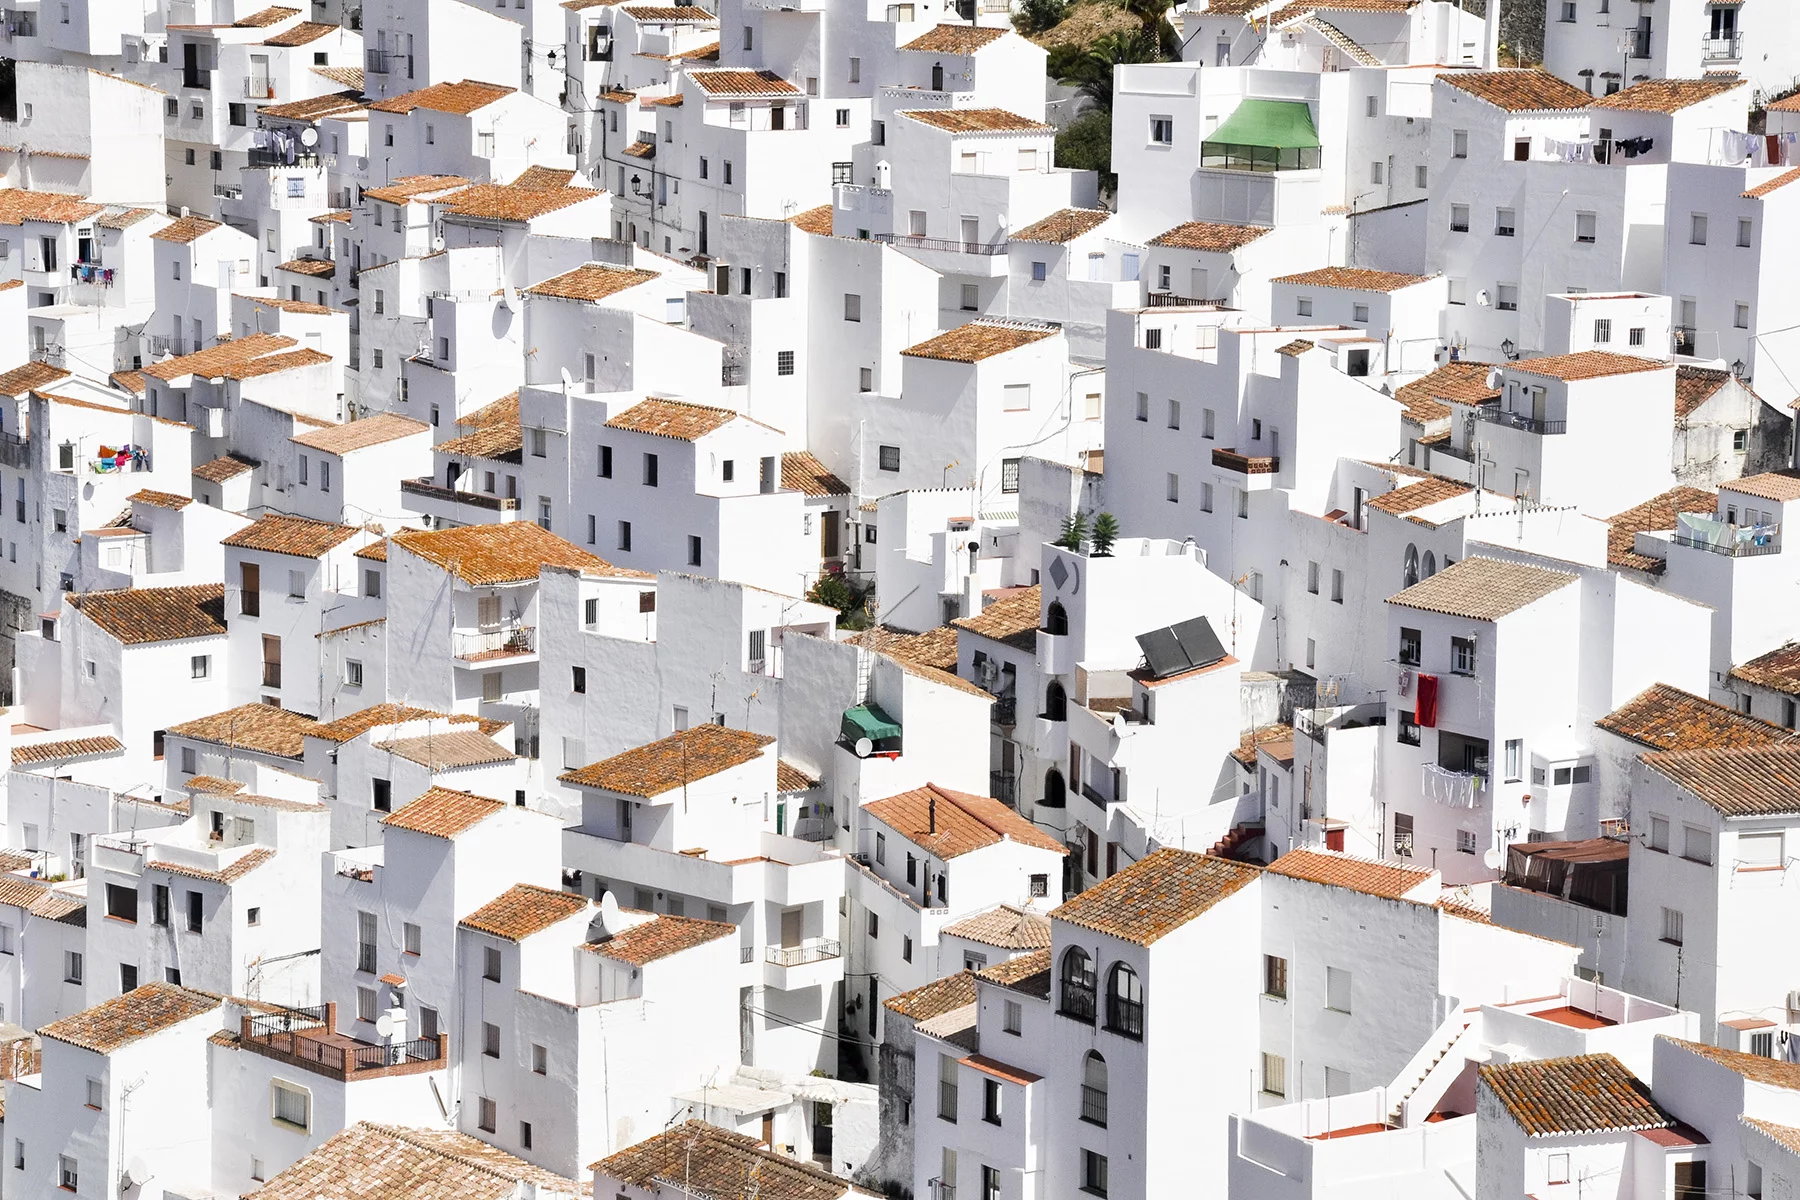 Houses in Casares, Spain